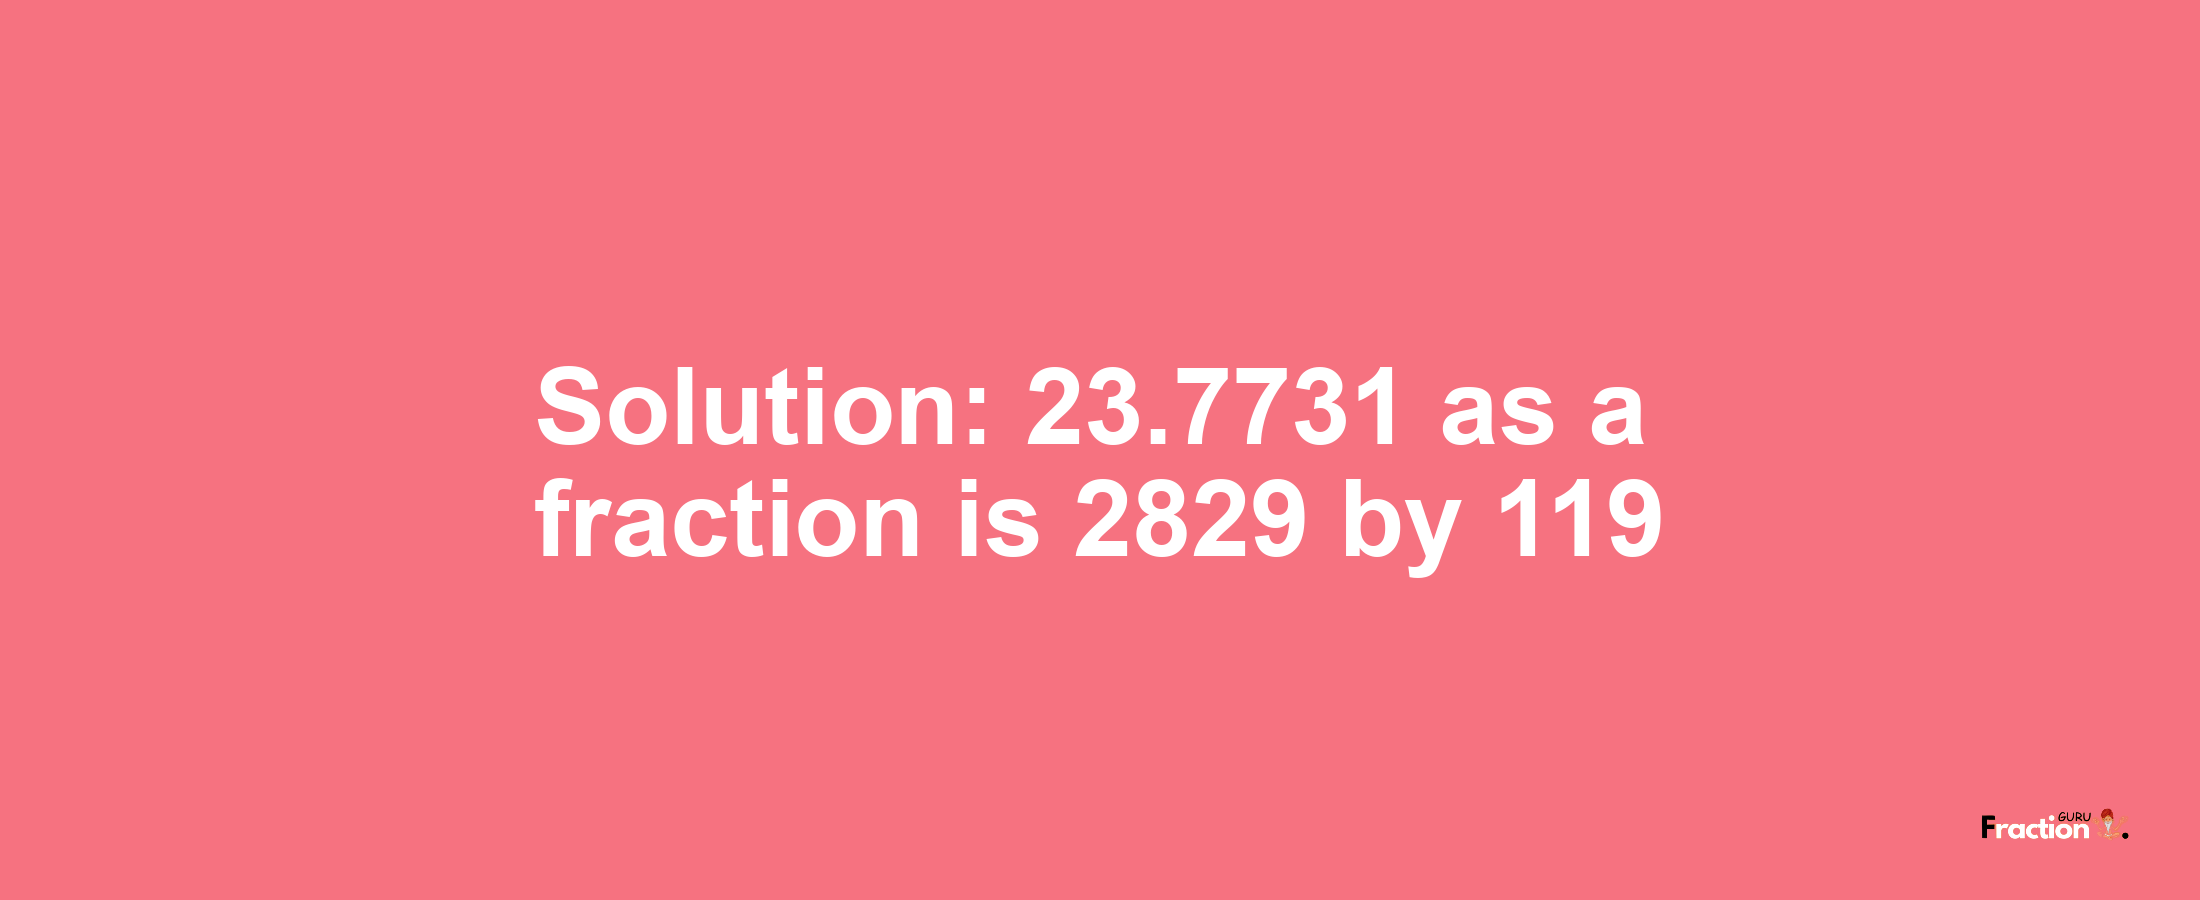 Solution:23.7731 as a fraction is 2829/119